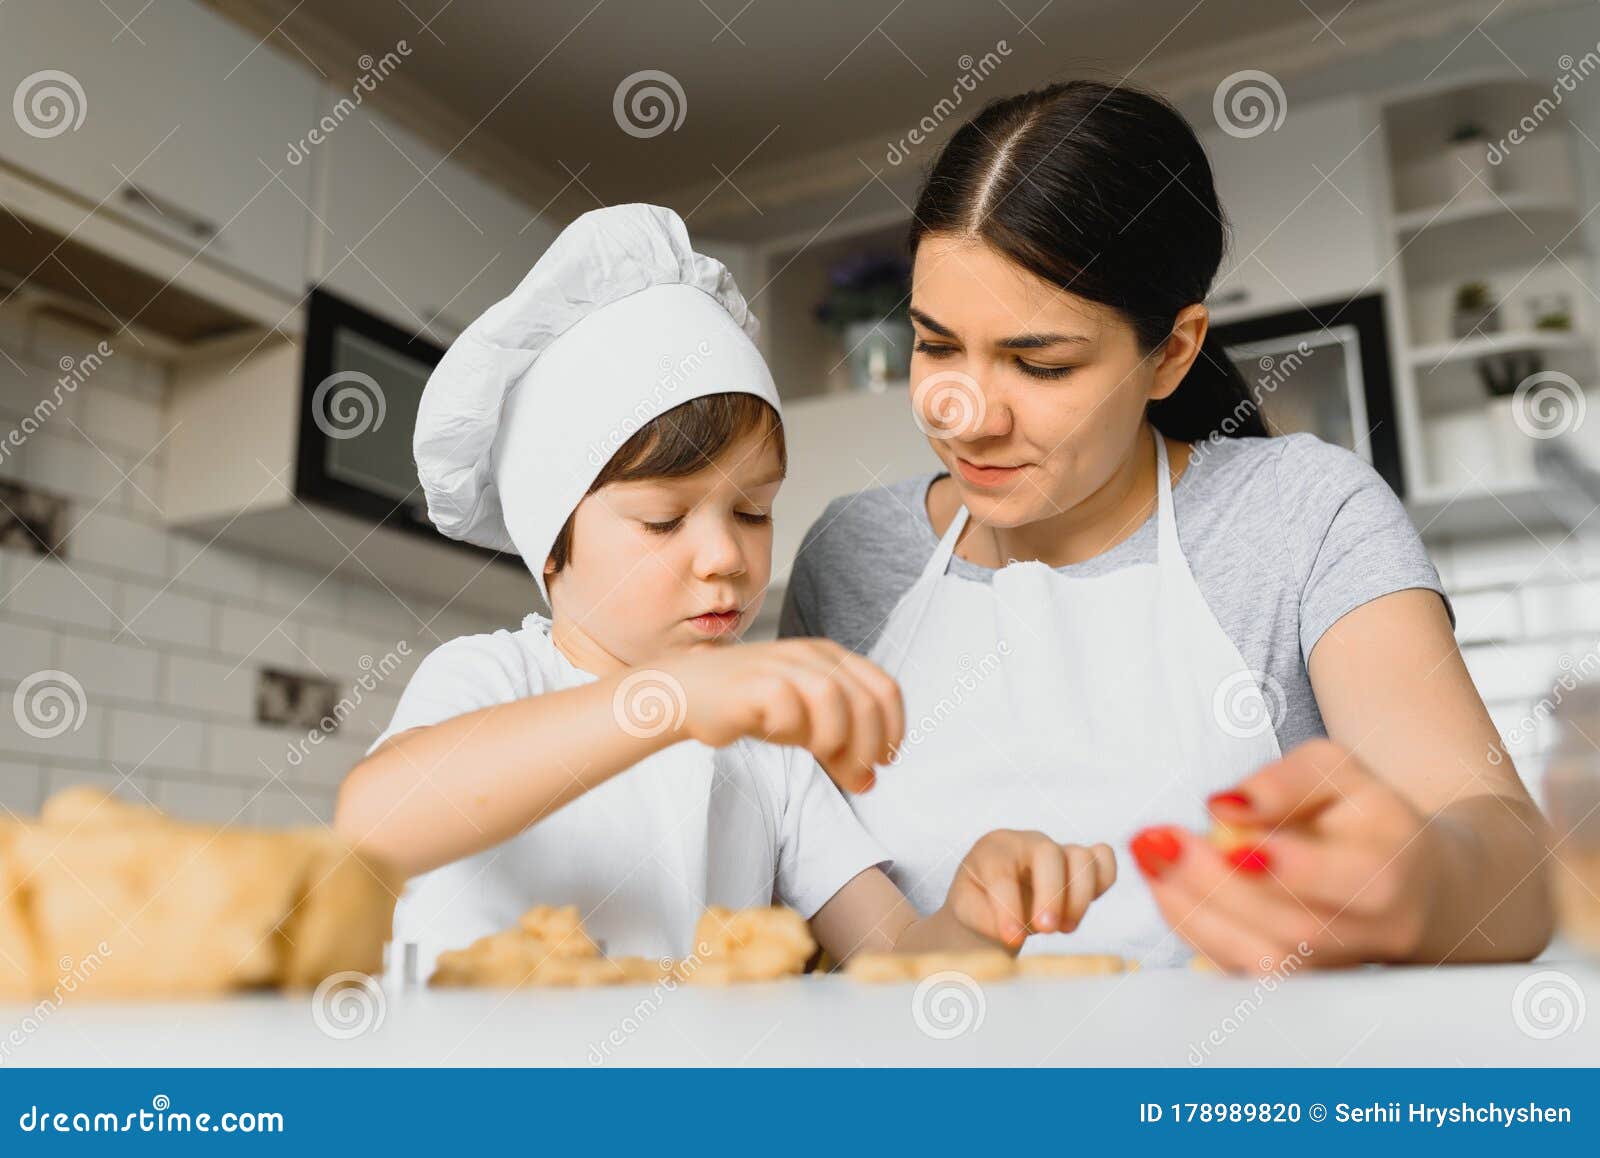 Little Boy Helping His Mother With The Baking In The Kitchen Standing